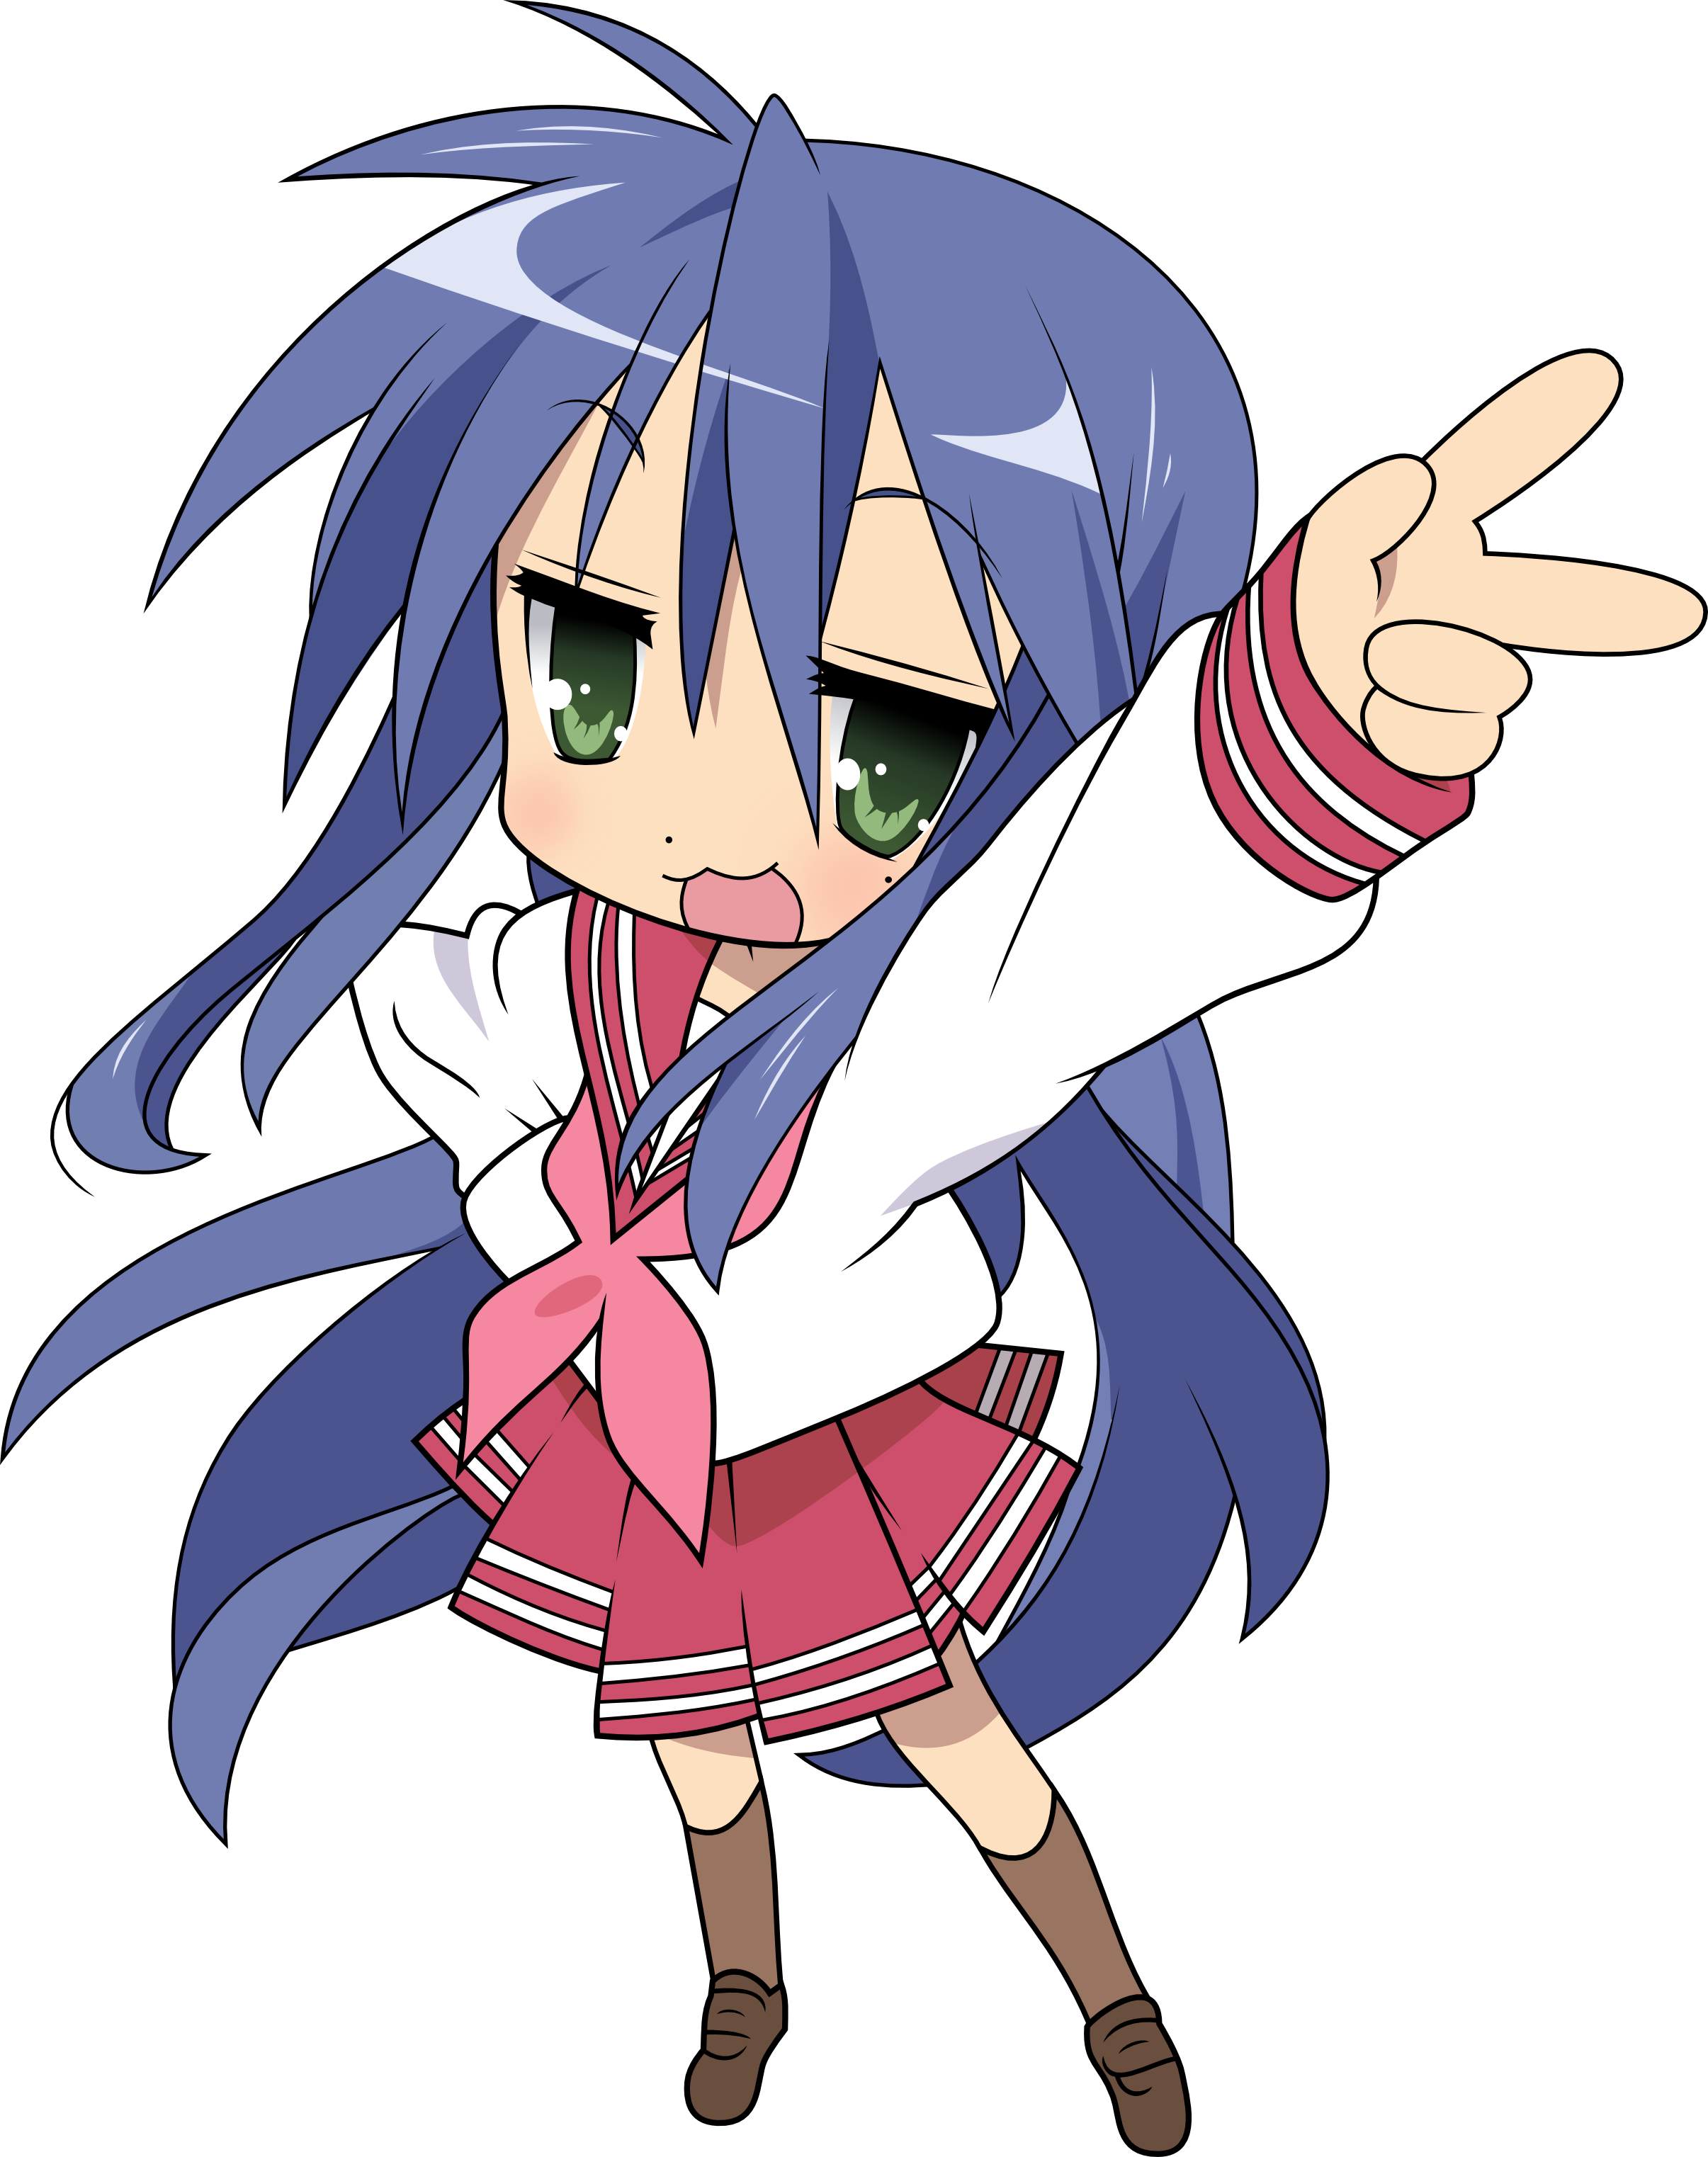 AN IMAGE OF KONATA IZUMI FROM LUCKY STAR DOING THE PIECE SIGN AND LOOKING UP TOWARD THE CAMERA.